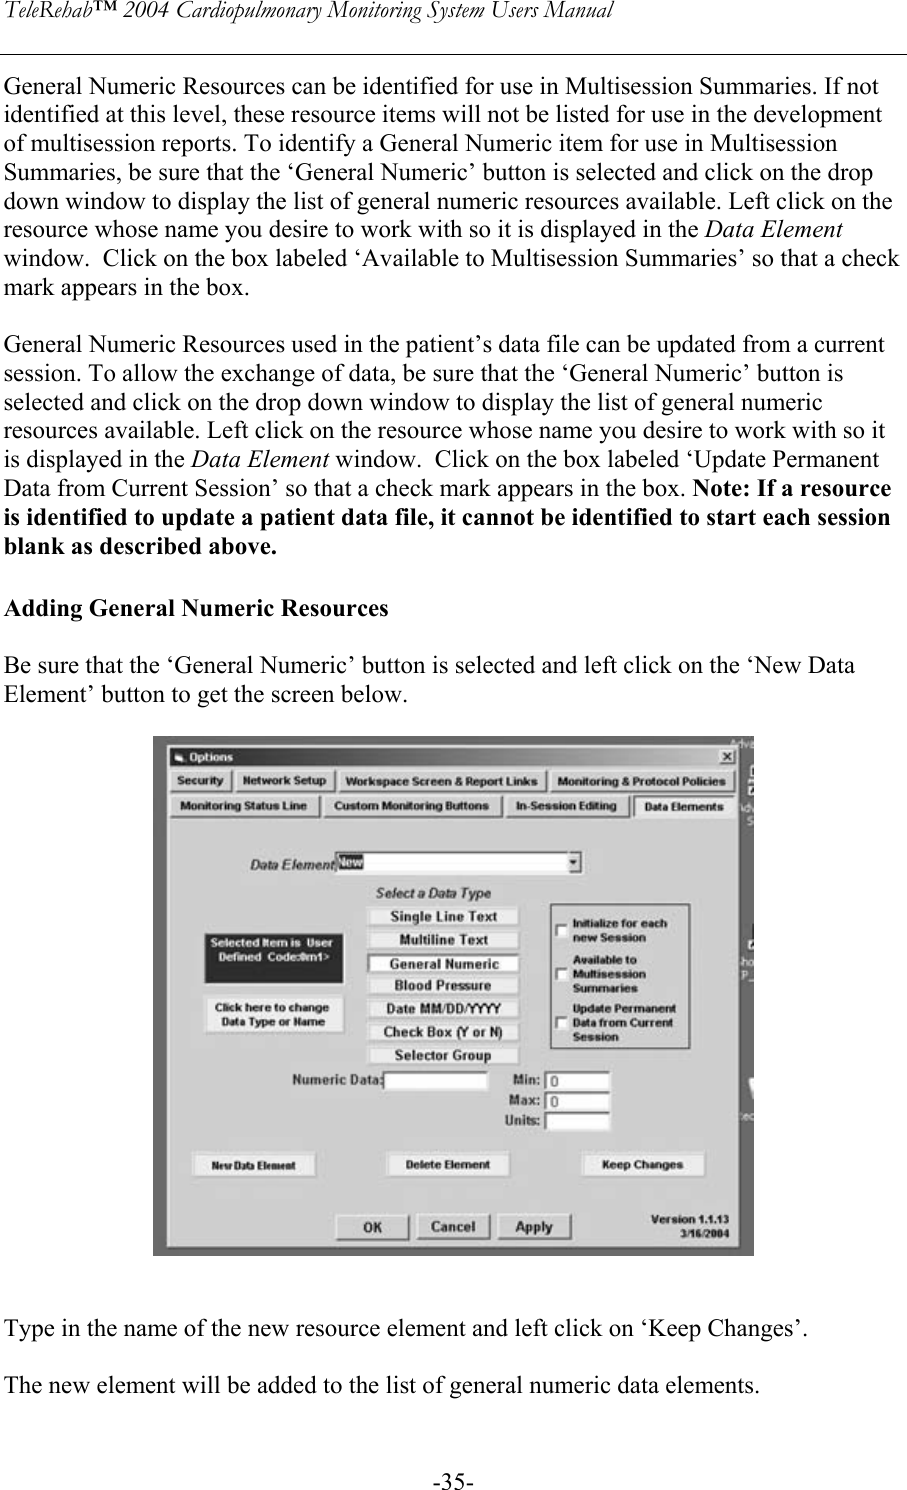 TeleRehab™ 2004 Cardiopulmonary Monitoring System Users Manual    -35-General Numeric Resources can be identified for use in Multisession Summaries. If not identified at this level, these resource items will not be listed for use in the development of multisession reports. To identify a General Numeric item for use in Multisession Summaries, be sure that the ‘General Numeric’ button is selected and click on the drop down window to display the list of general numeric resources available. Left click on the resource whose name you desire to work with so it is displayed in the Data Element window.  Click on the box labeled ‘Available to Multisession Summaries’ so that a check mark appears in the box.  General Numeric Resources used in the patient’s data file can be updated from a current session. To allow the exchange of data, be sure that the ‘General Numeric’ button is selected and click on the drop down window to display the list of general numeric resources available. Left click on the resource whose name you desire to work with so it is displayed in the Data Element window.  Click on the box labeled ‘Update Permanent Data from Current Session’ so that a check mark appears in the box. Note: If a resource is identified to update a patient data file, it cannot be identified to start each session blank as described above.  Adding General Numeric Resources  Be sure that the ‘General Numeric’ button is selected and left click on the ‘New Data Element’ button to get the screen below.         Type in the name of the new resource element and left click on ‘Keep Changes’.  The new element will be added to the list of general numeric data elements.  